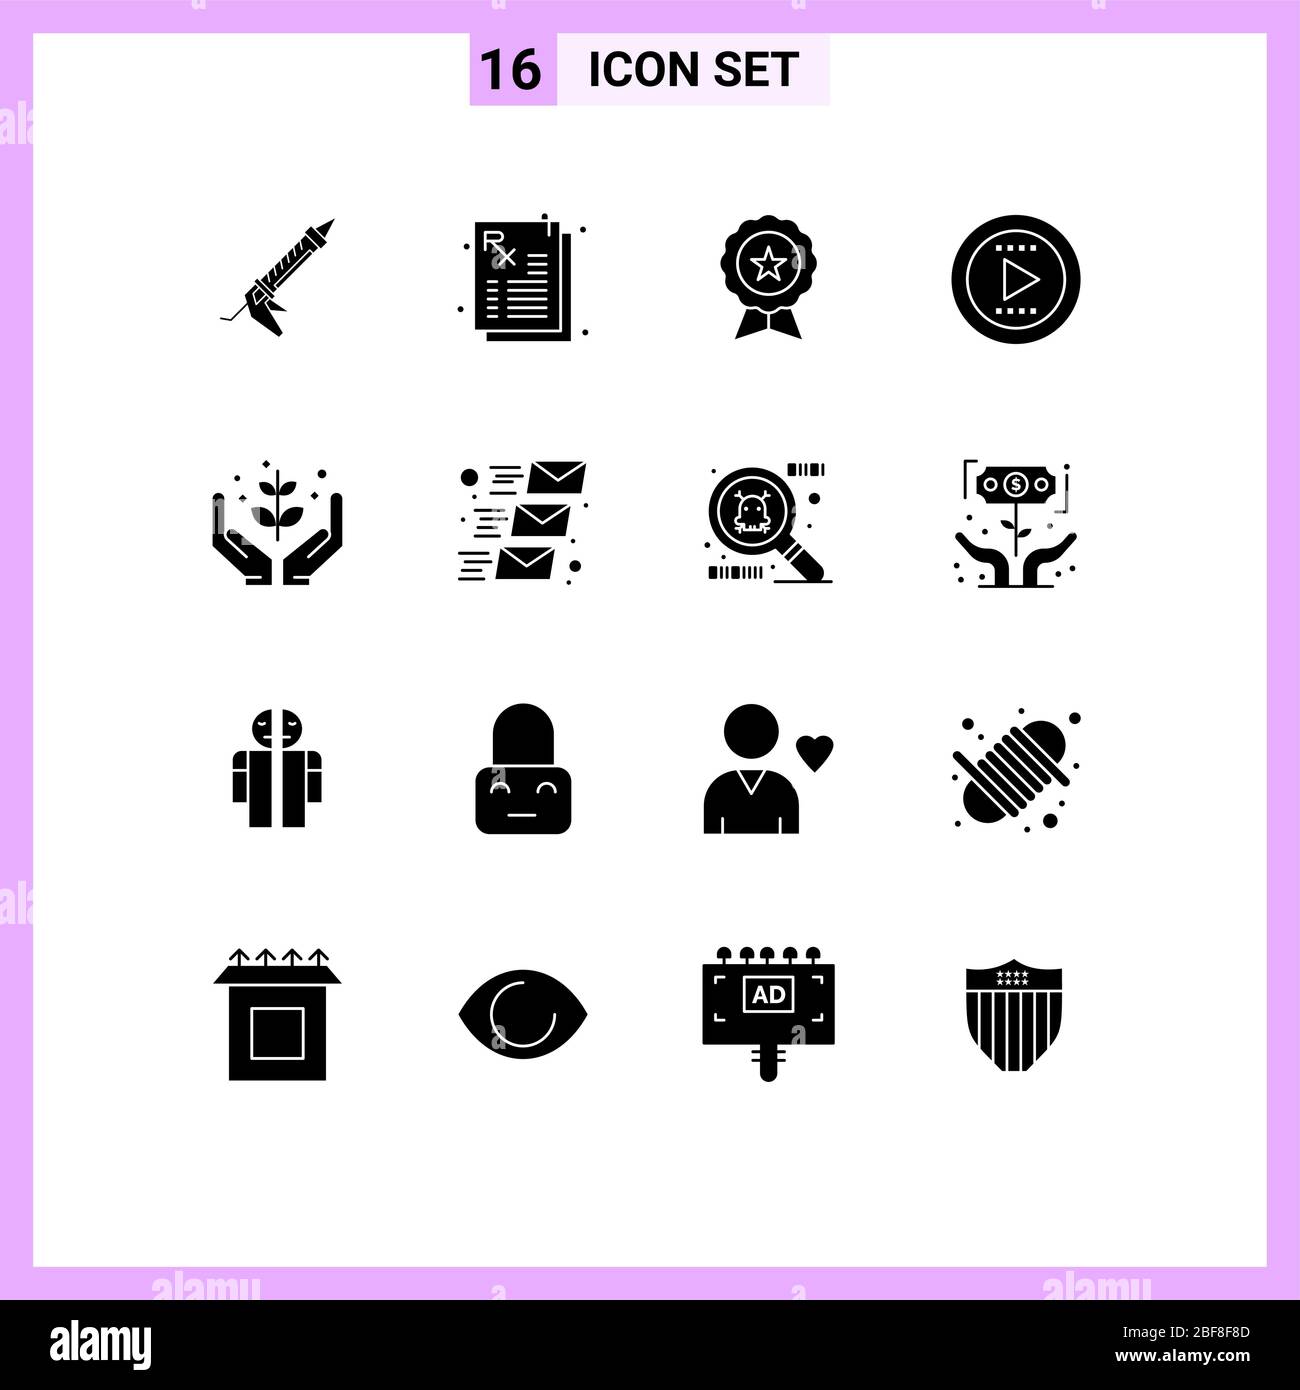 User Interface Pack of 16 Basic Solid Glyphs of farming, play, badge, media, trusted Editable Vector Design Elements Stock Vector